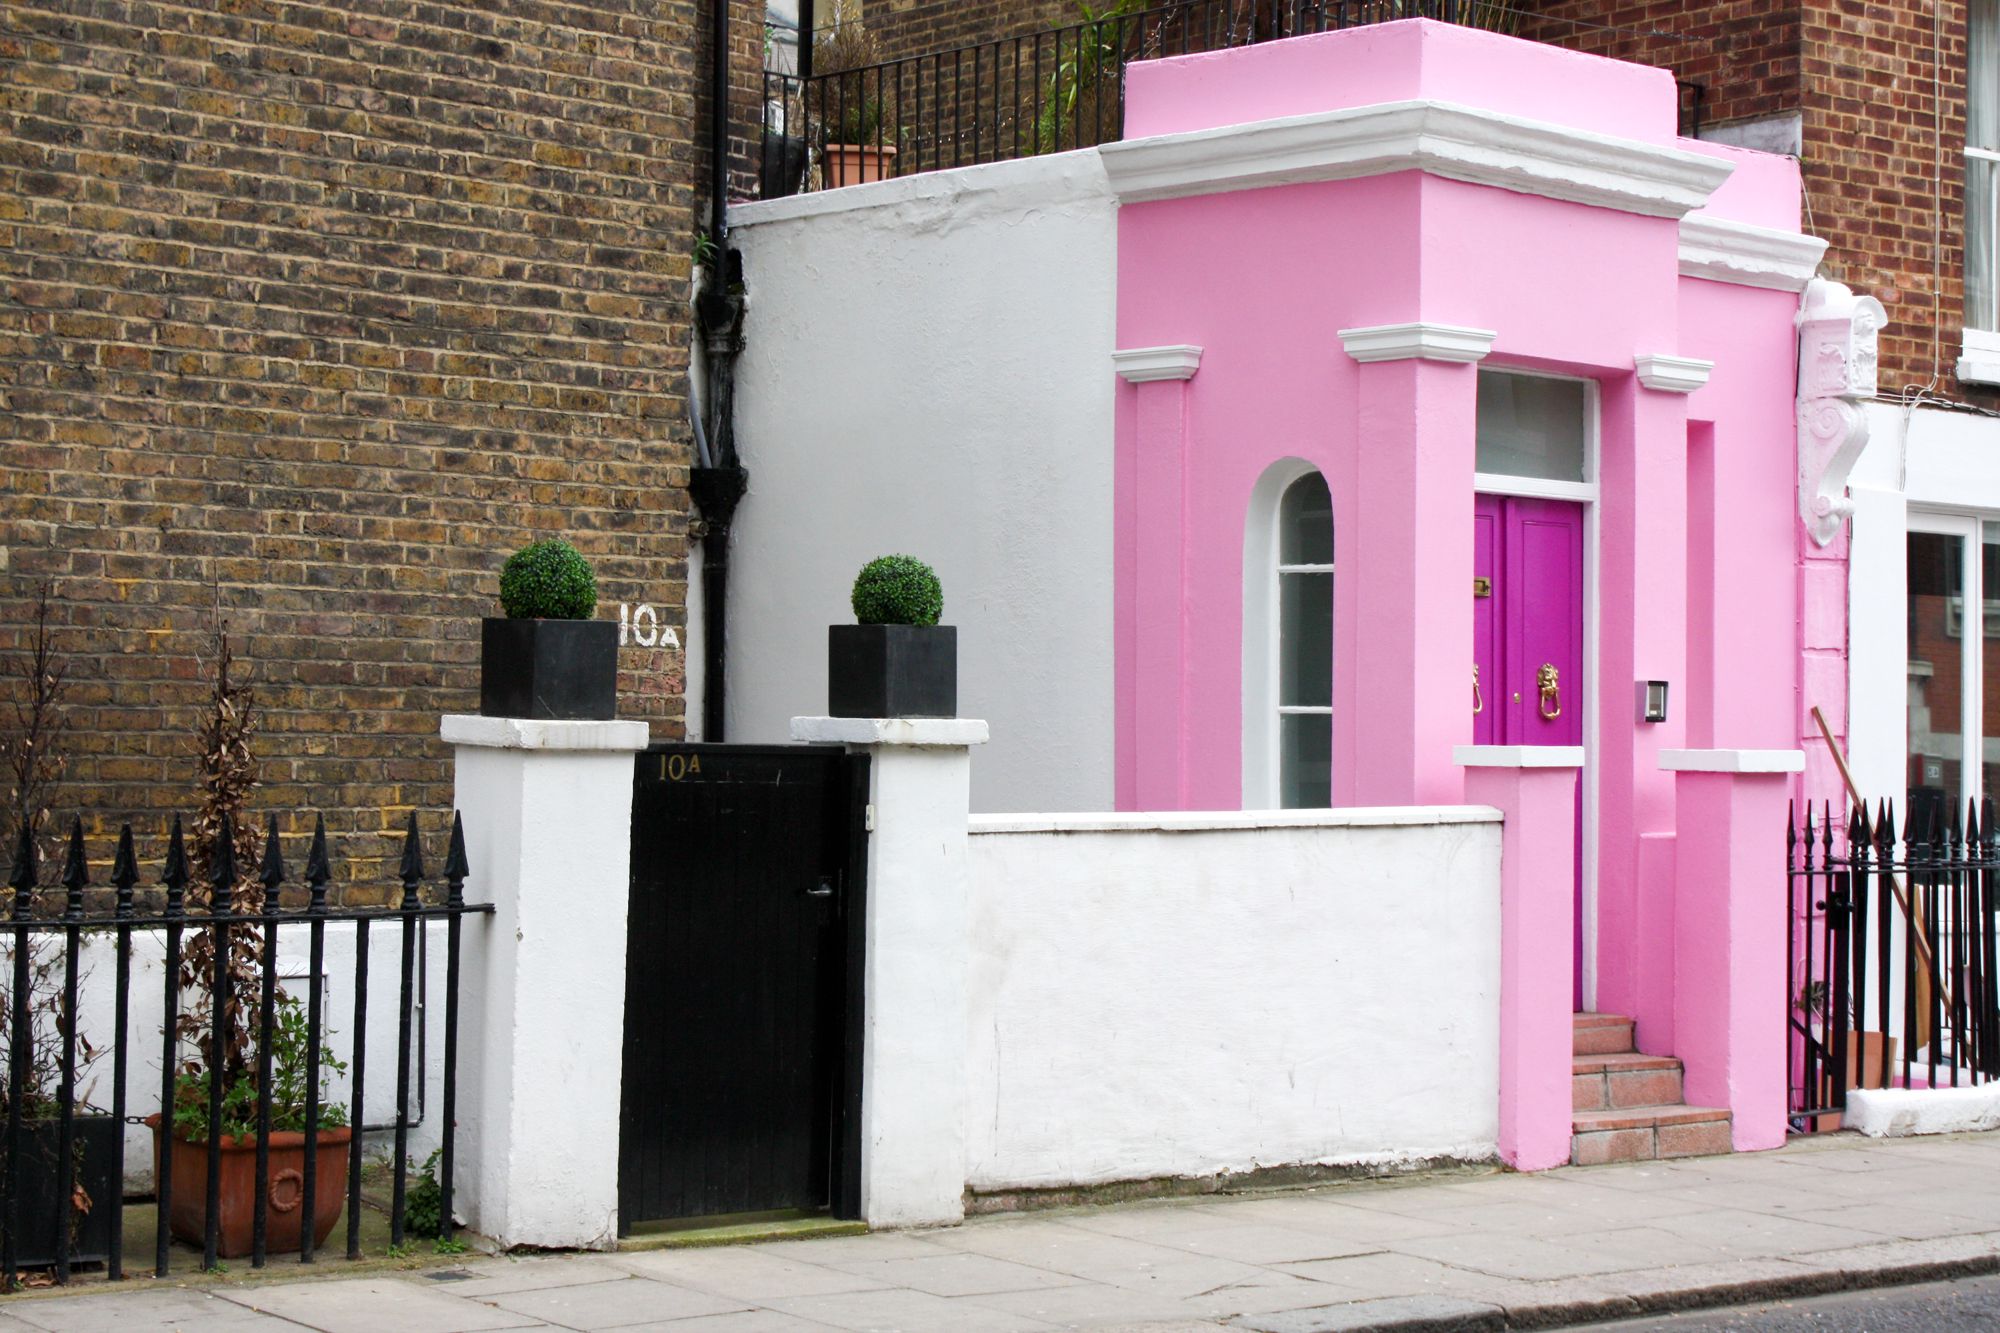 Hotels, B&Bs & Self-Catering in Notting Hill London - Cool Places to